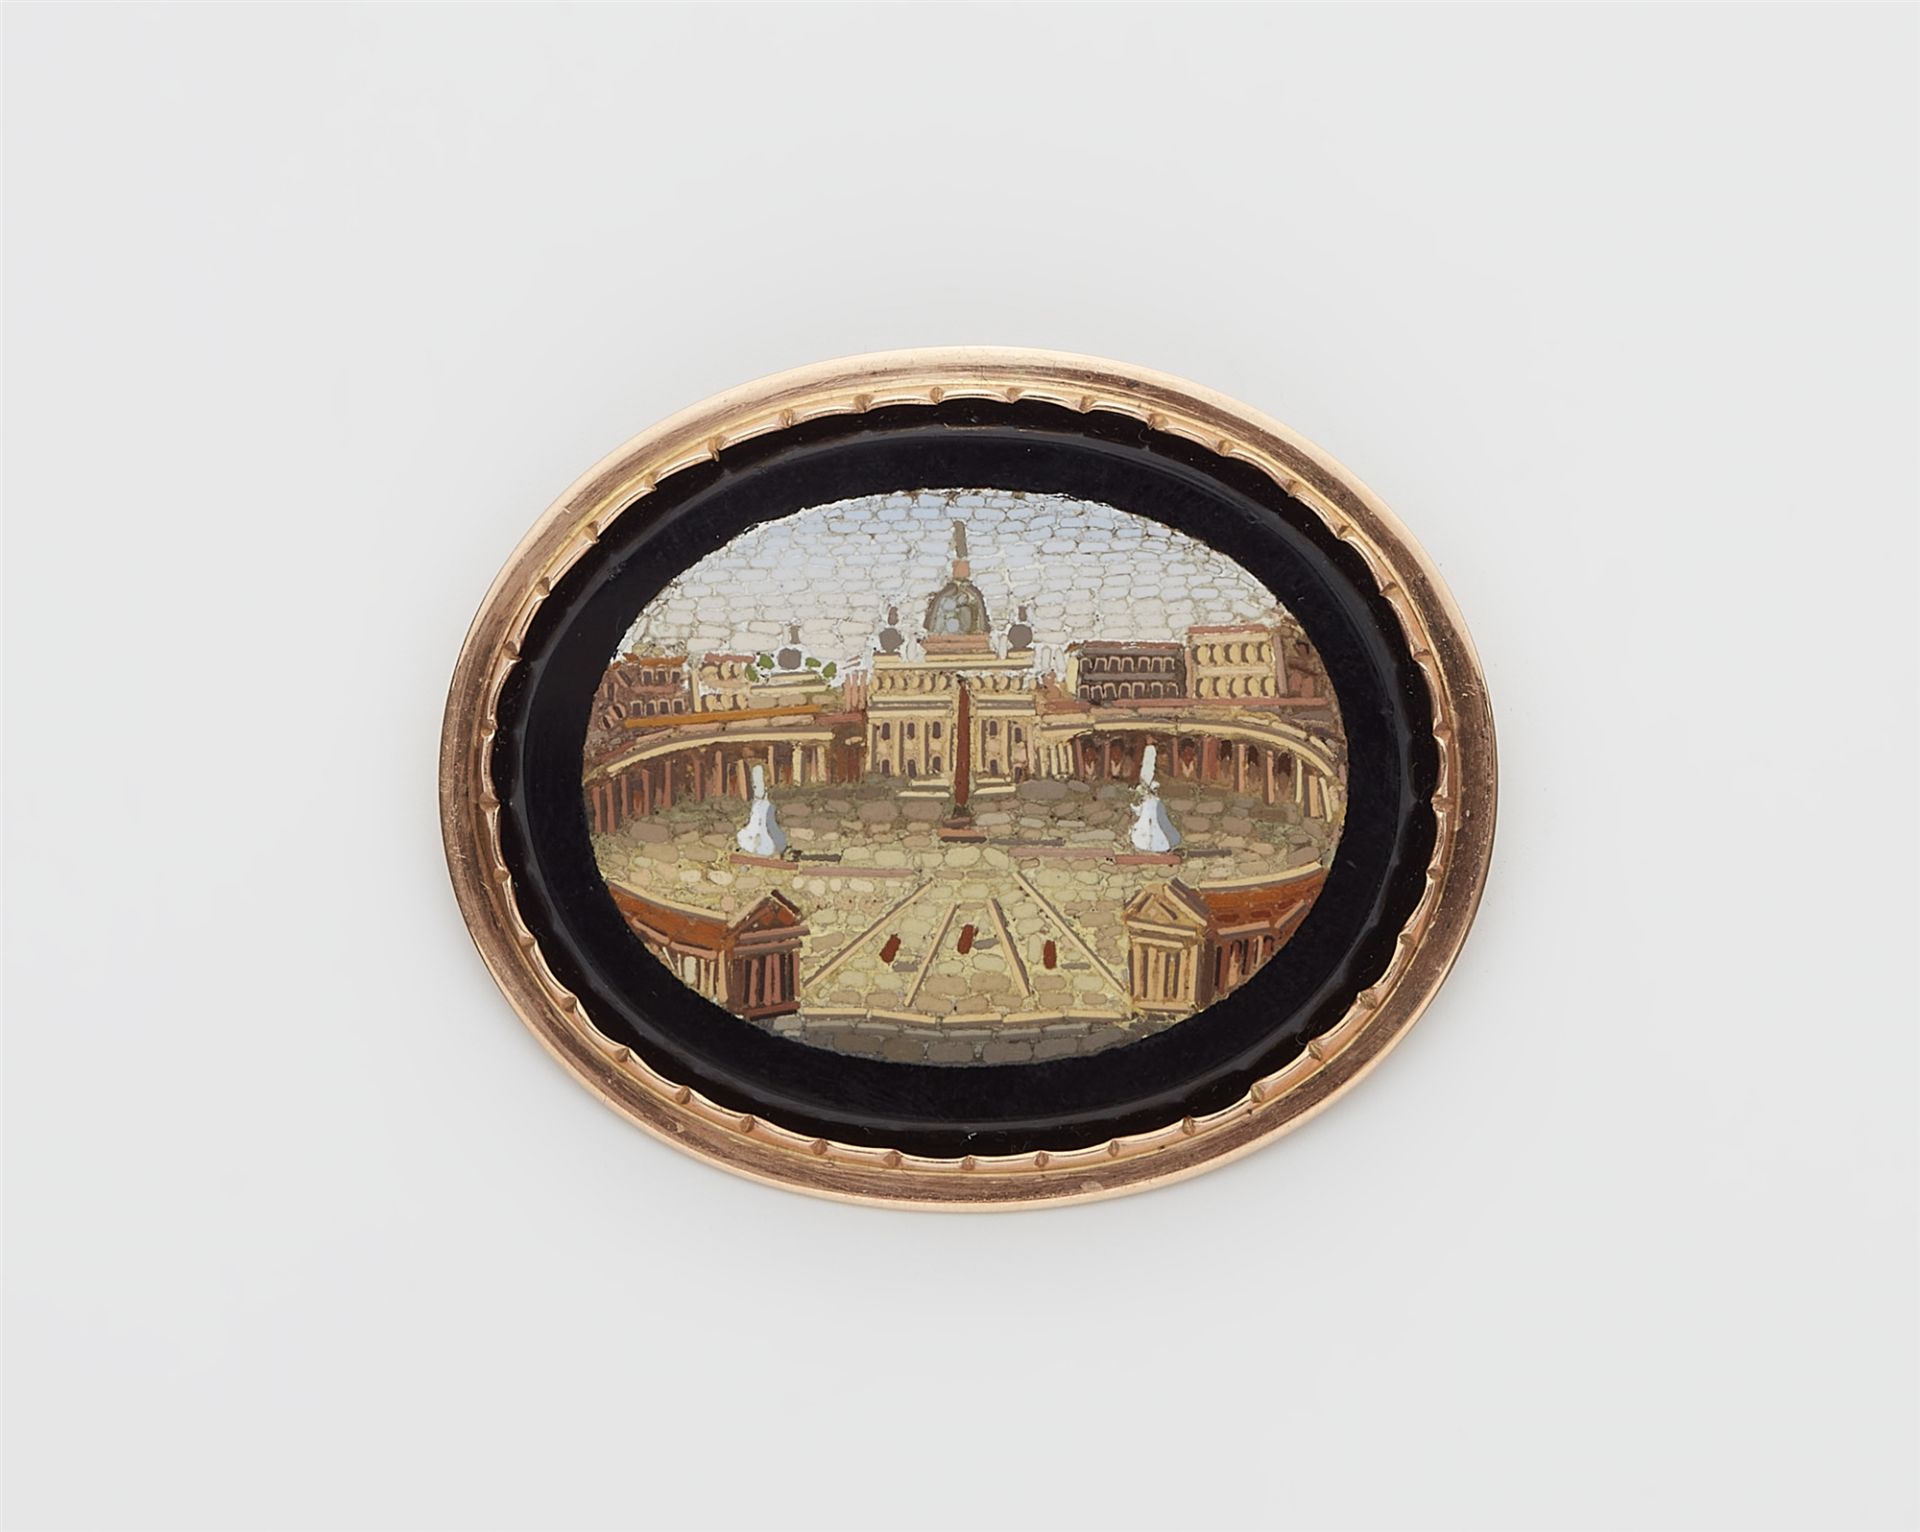 A 14k gold and Roman micromosaic brooch depicting the St. Peters Square in Rome.